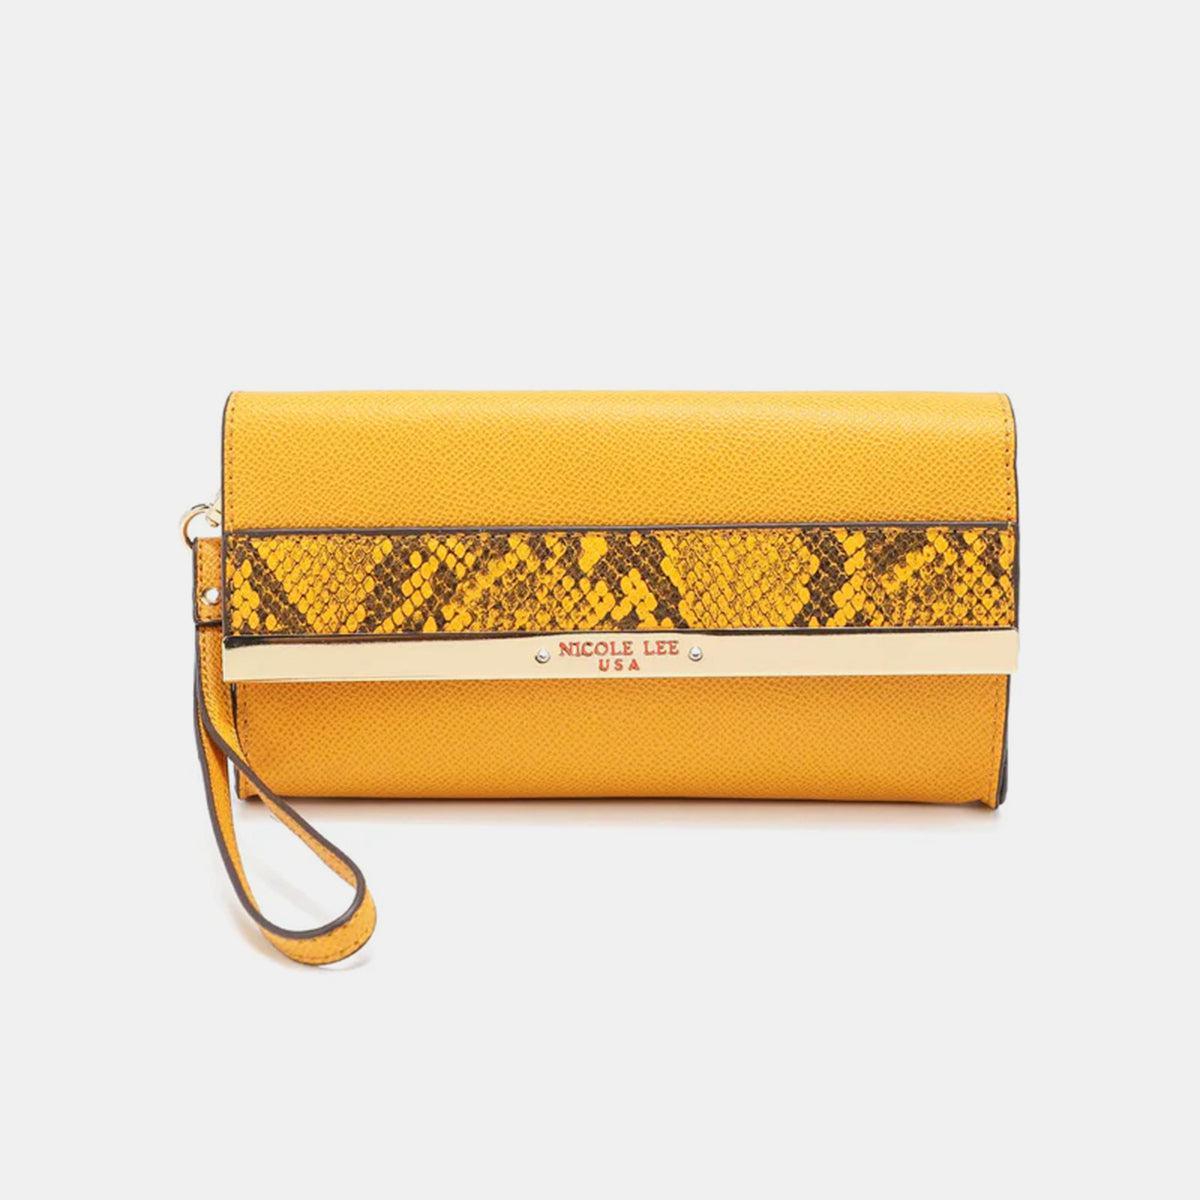 a yellow wallet with a snake skin pattern